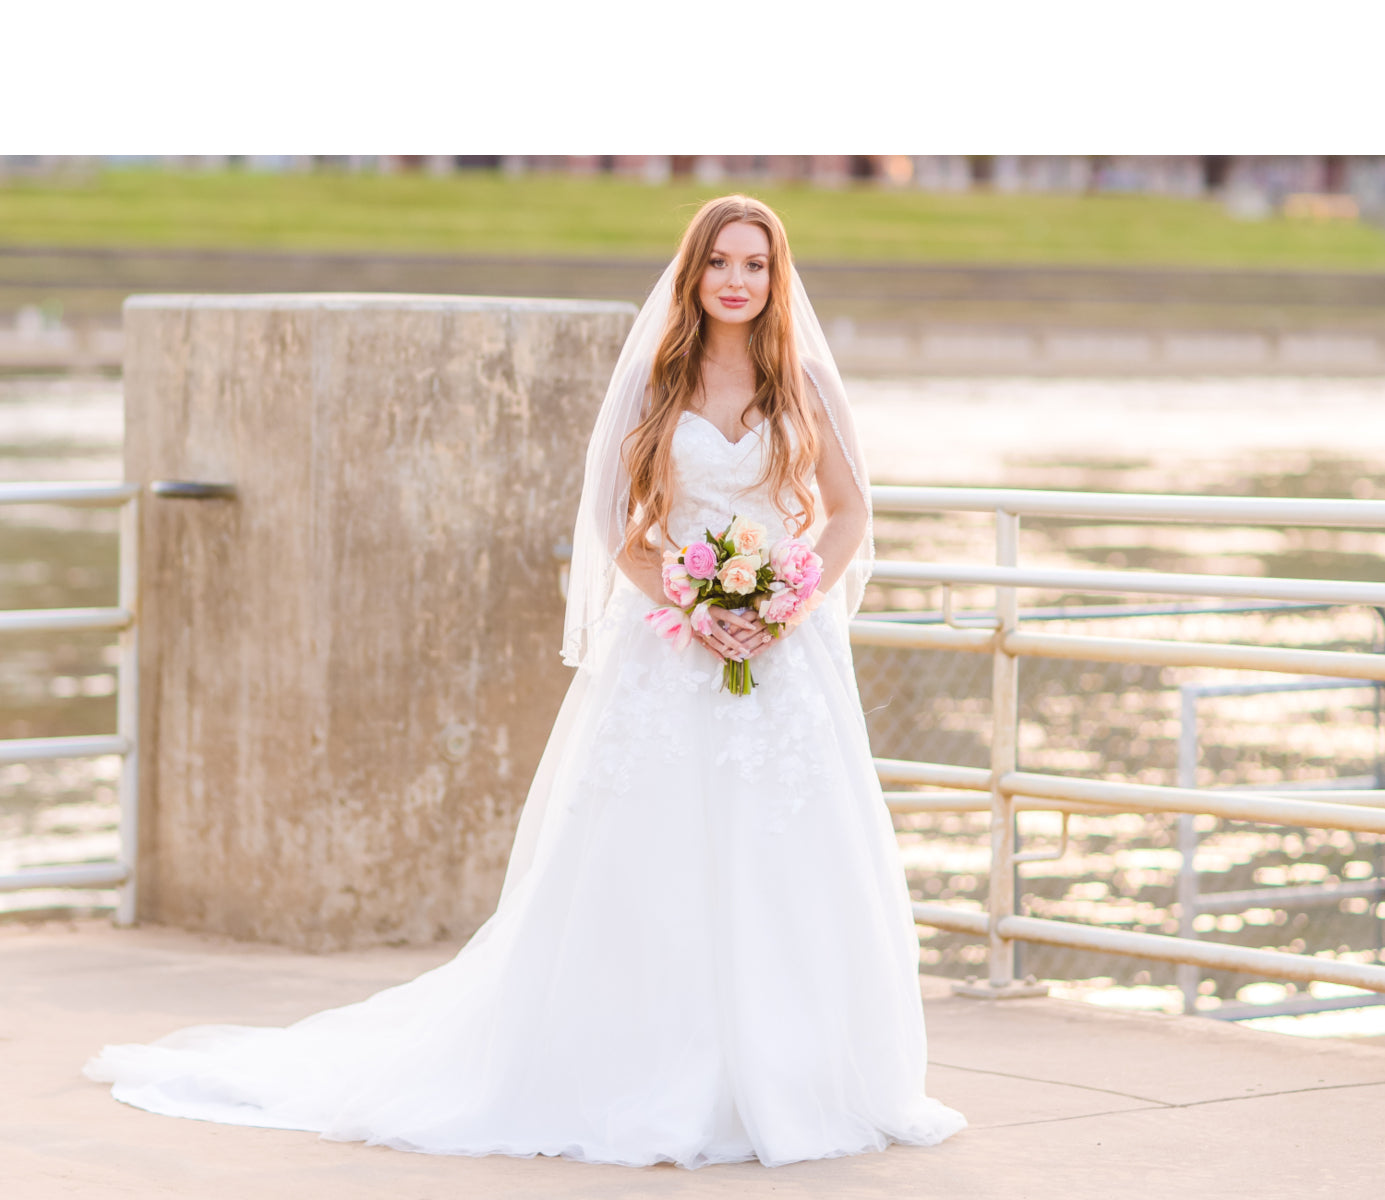 How Long Does It Take To Order A Wedding Dress At Avery Austin?